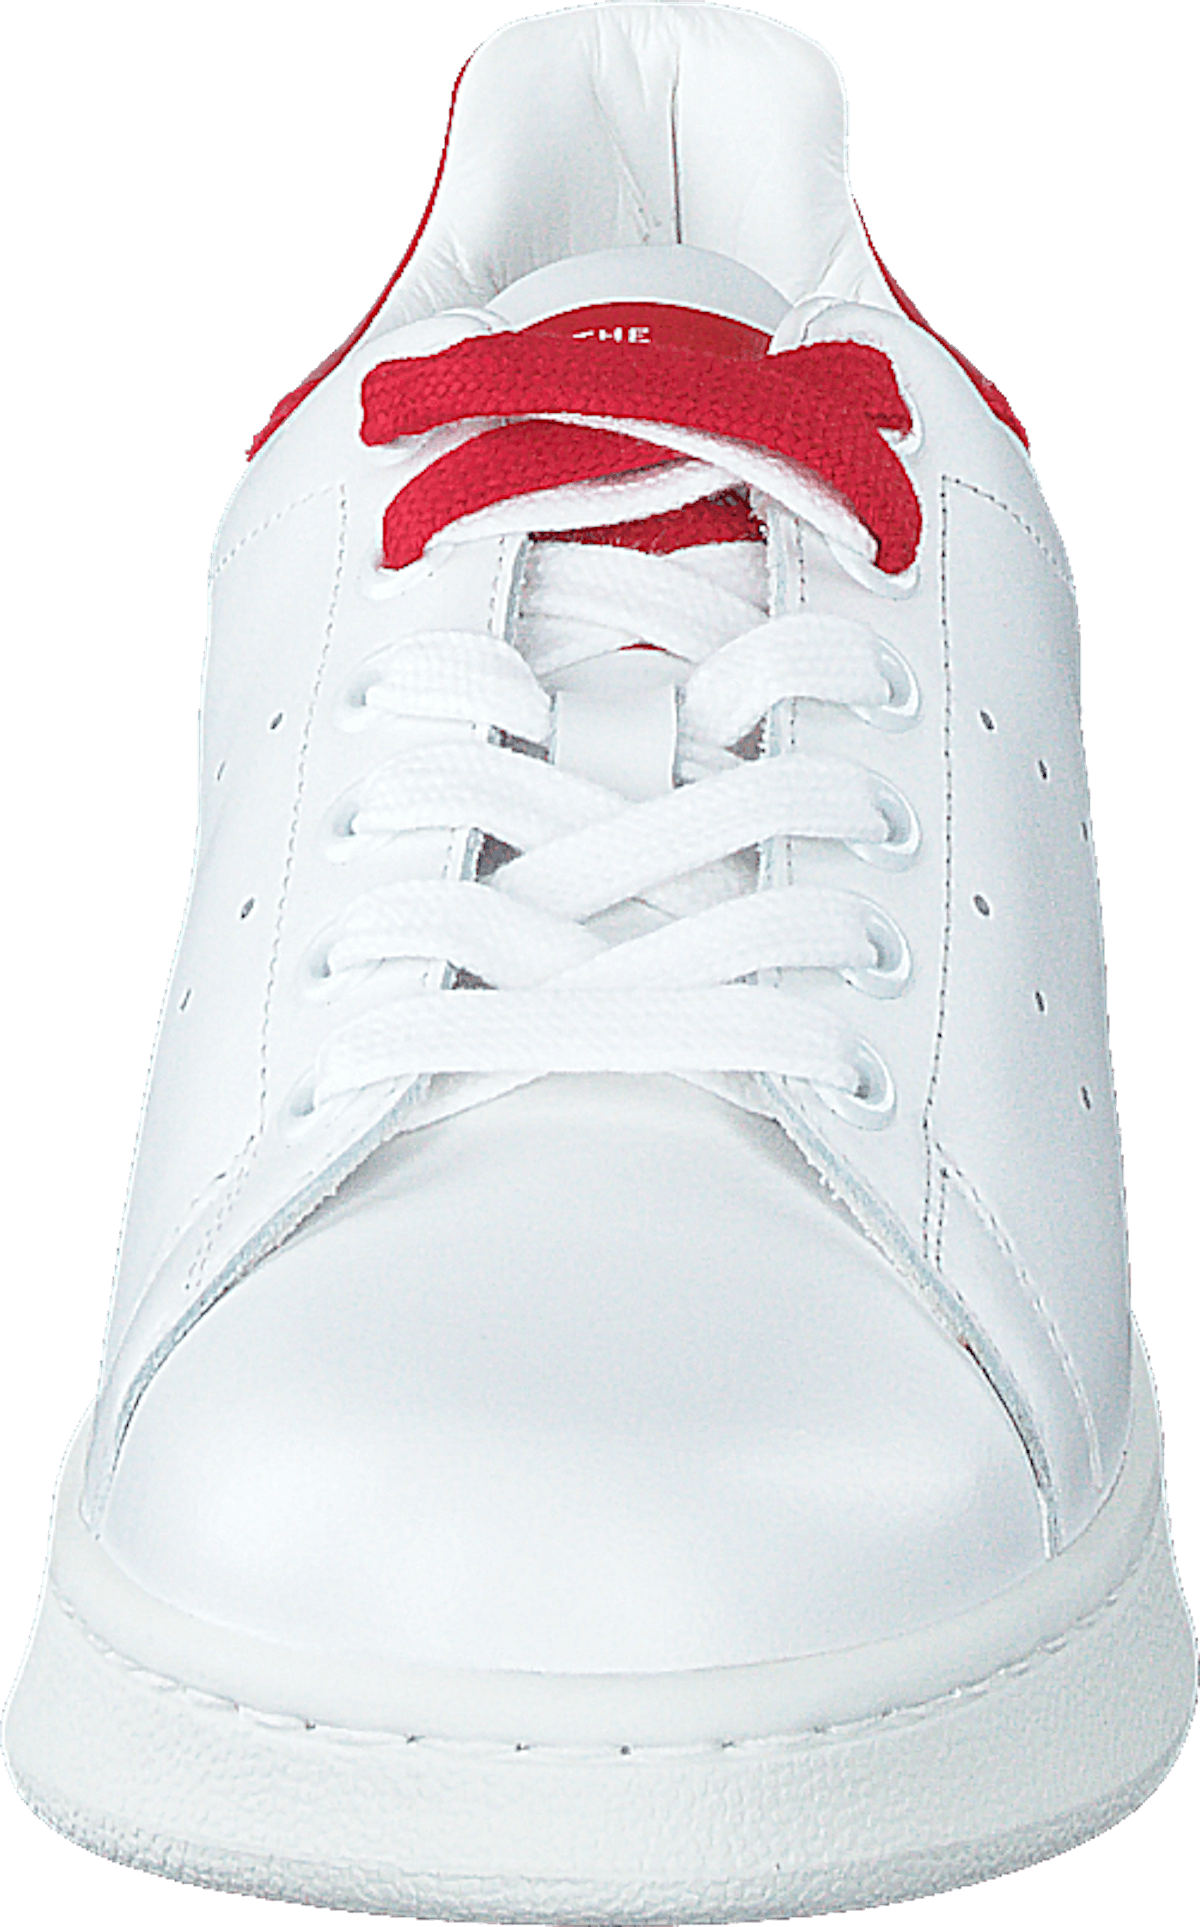 The Tennis Shoe White-red